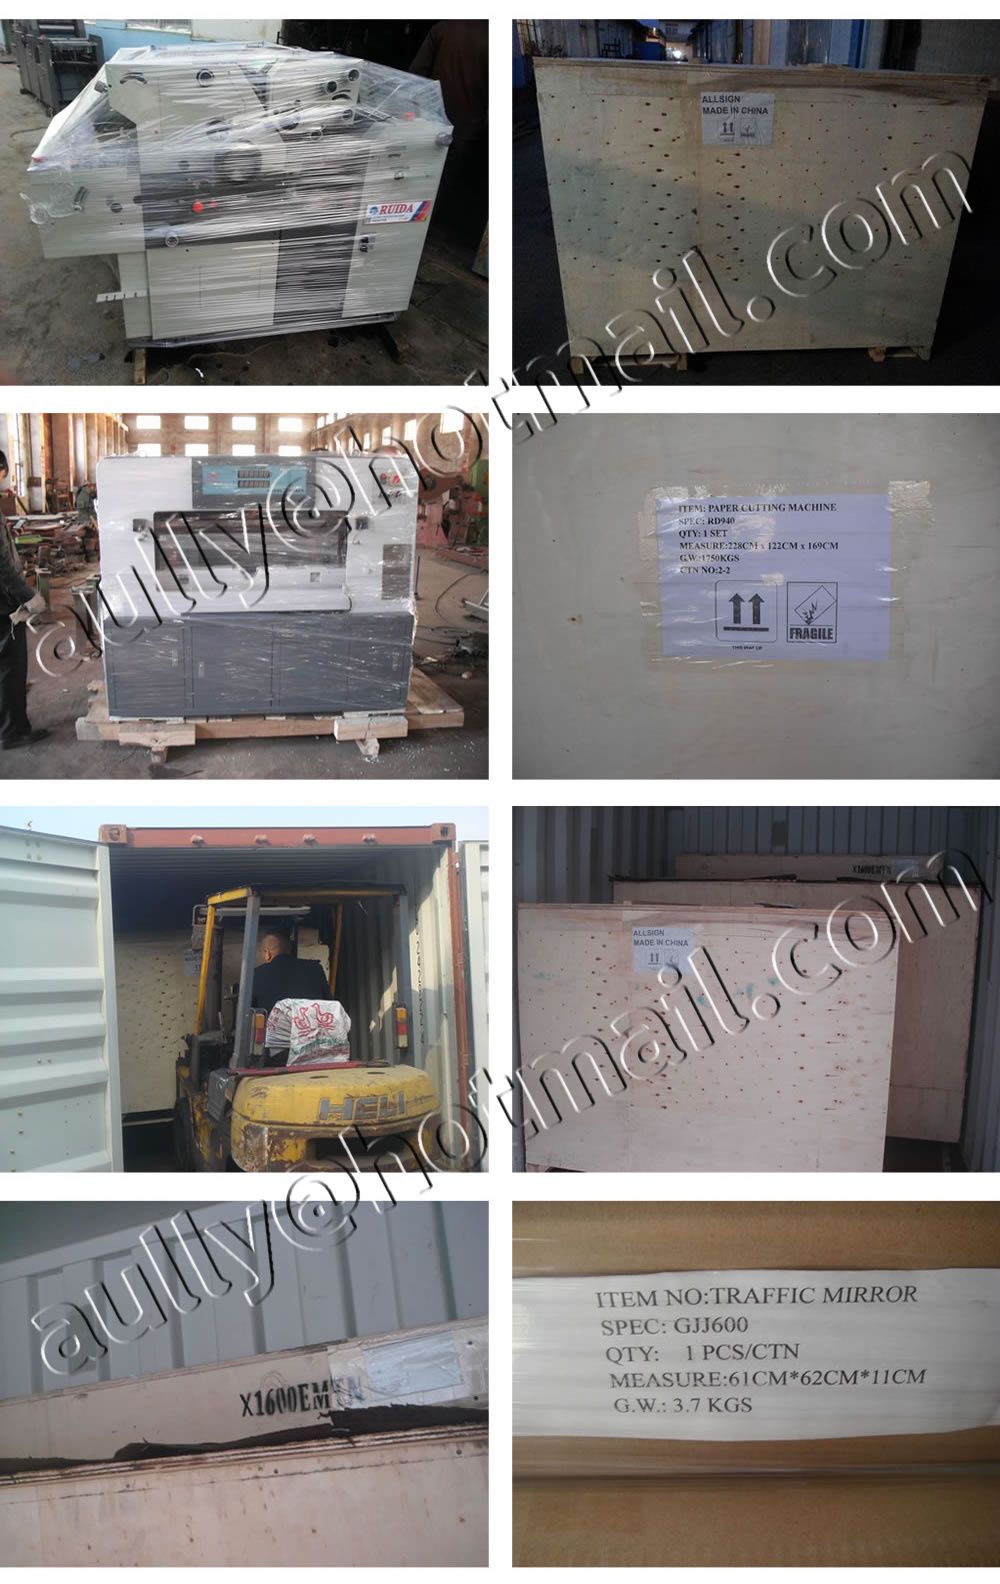 AS131015KW (Equipments / Materials / Parts) to Kuwait